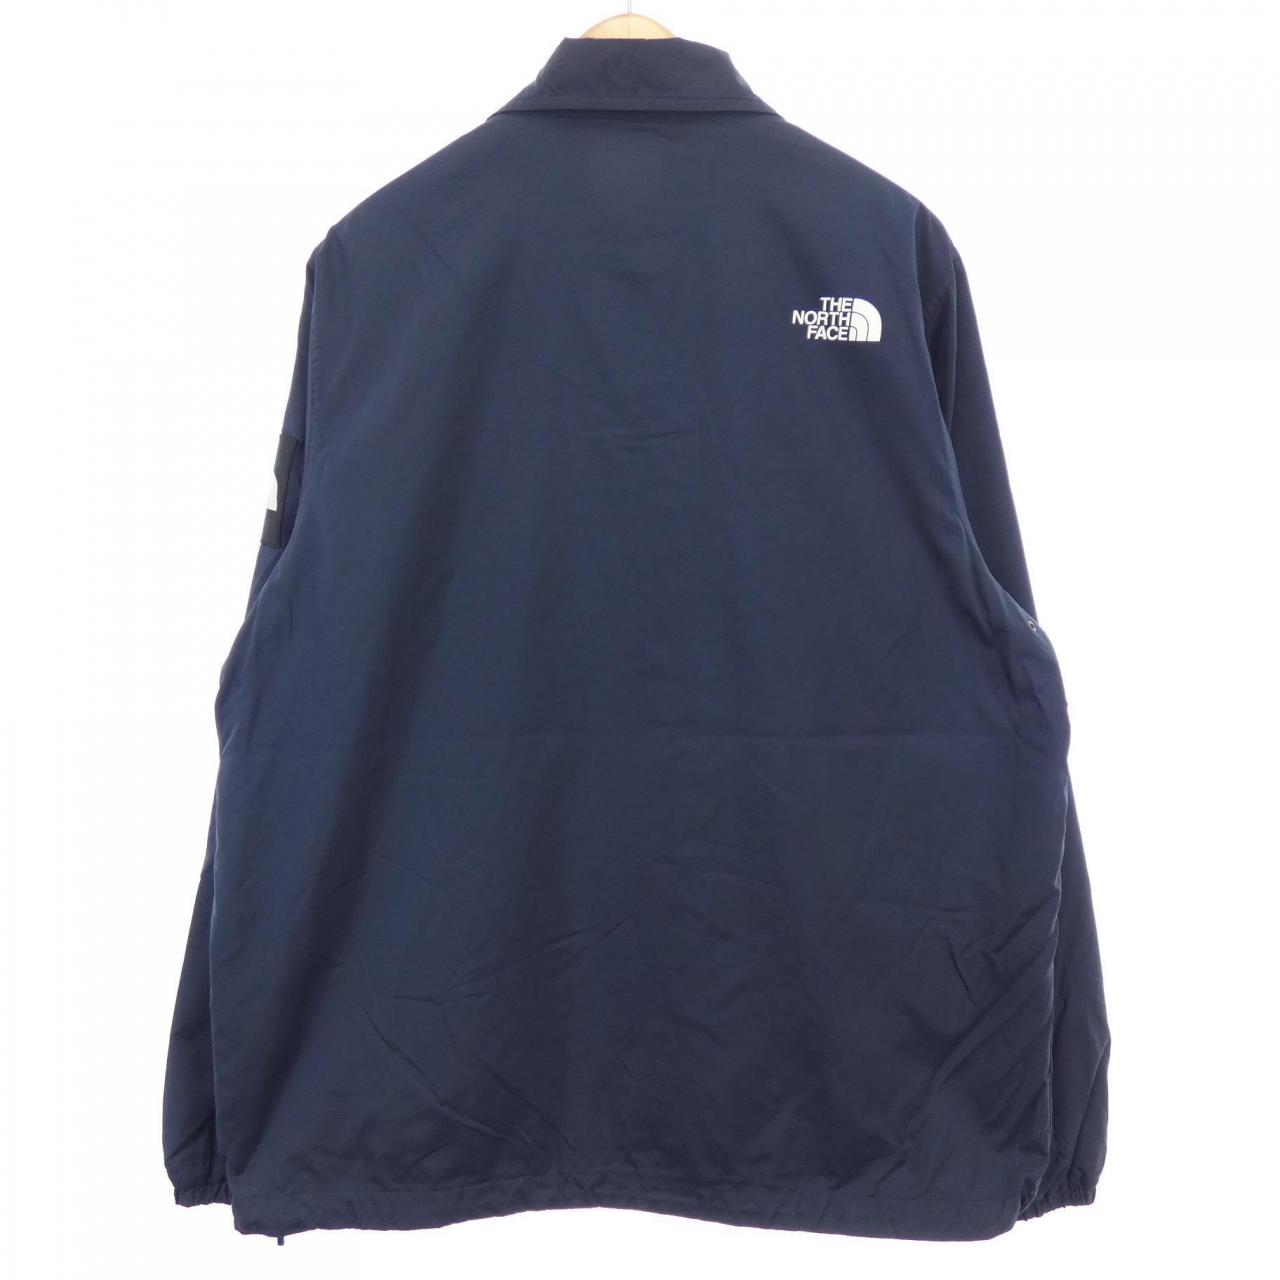 The North Face THE NORTH FACE jacket